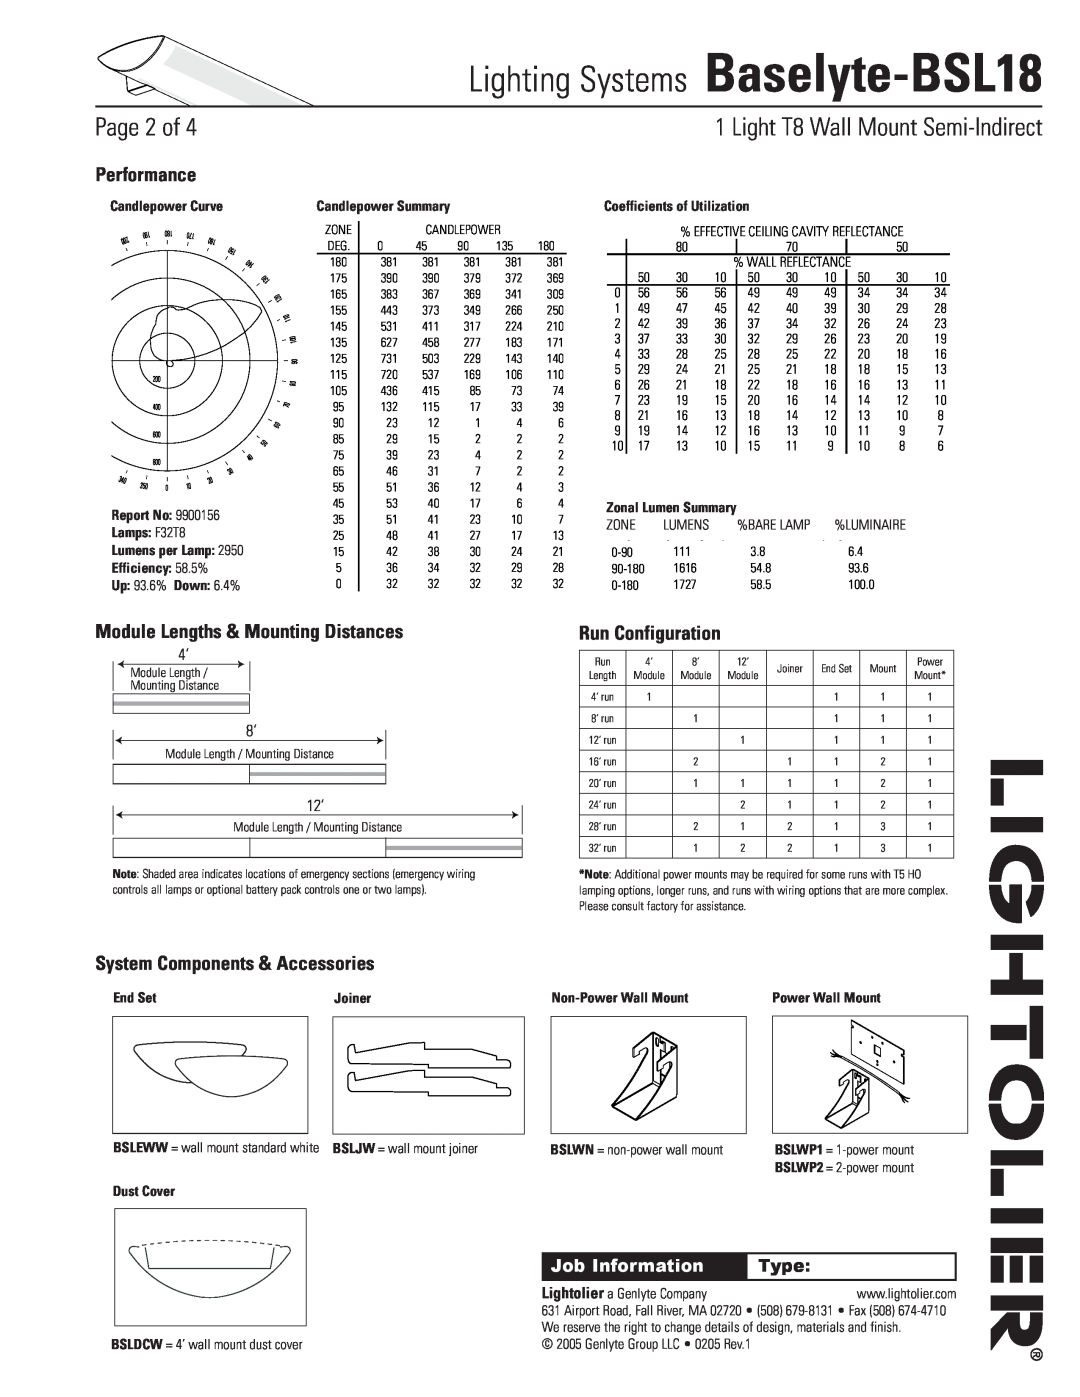 Lightolier Baselyte-BSL18 Page of,  Light T8 Wall Mount Semi-Indirect, Performance, Module Lengths & Mounting Distances 